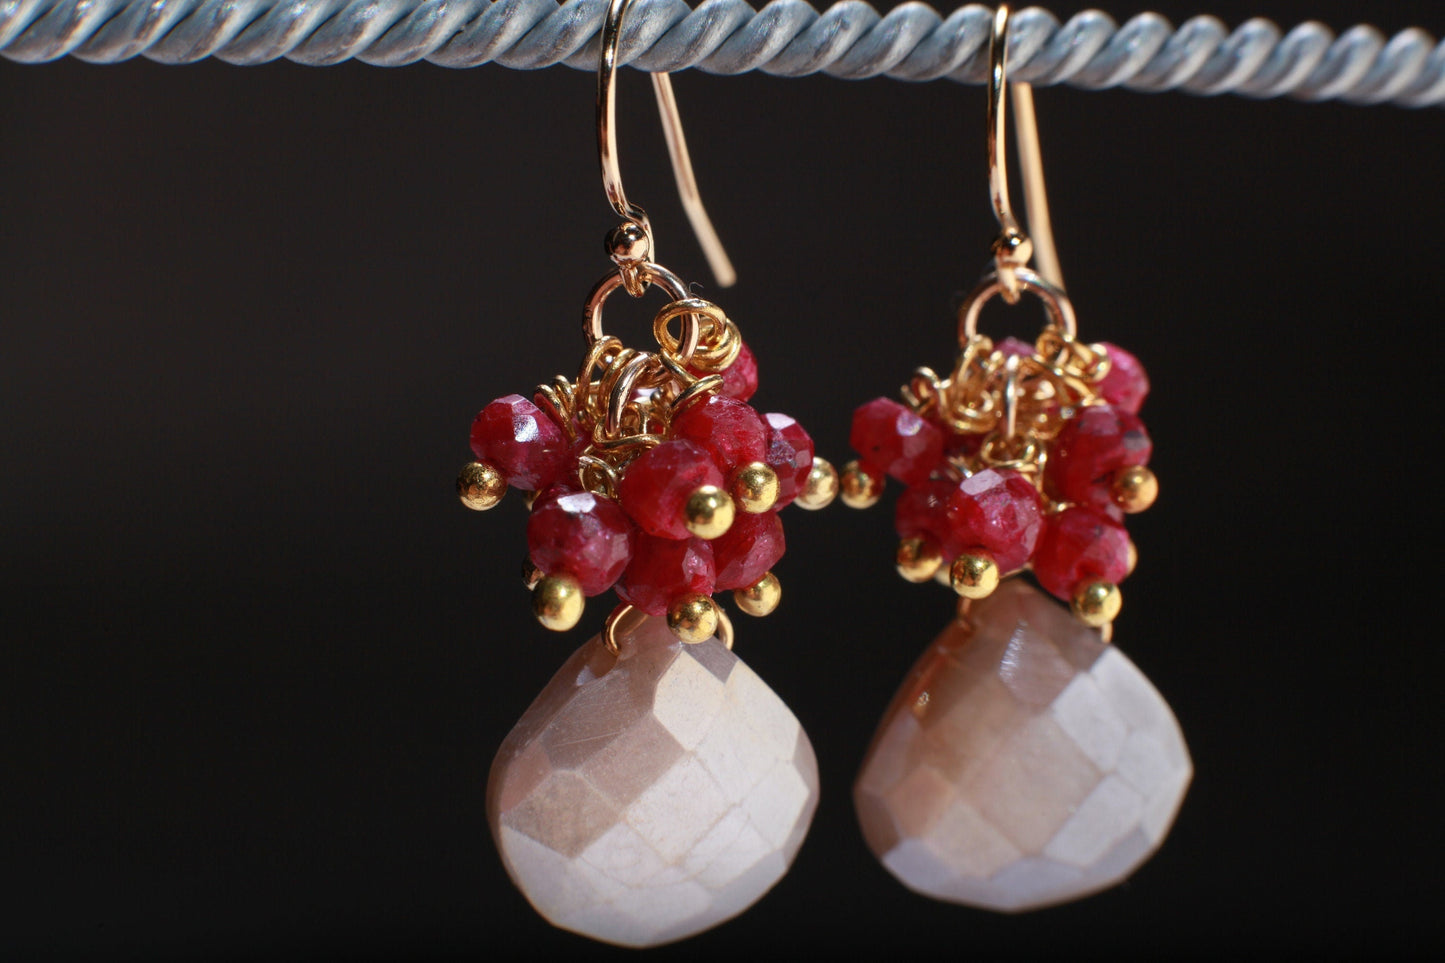 Genuine Ruby Cluster Wire Wrapped, Peach Moonstone Dangling Earrings in 14K Gold Filled Ear Wire, Valentine, Bridesmaid, Gift for her